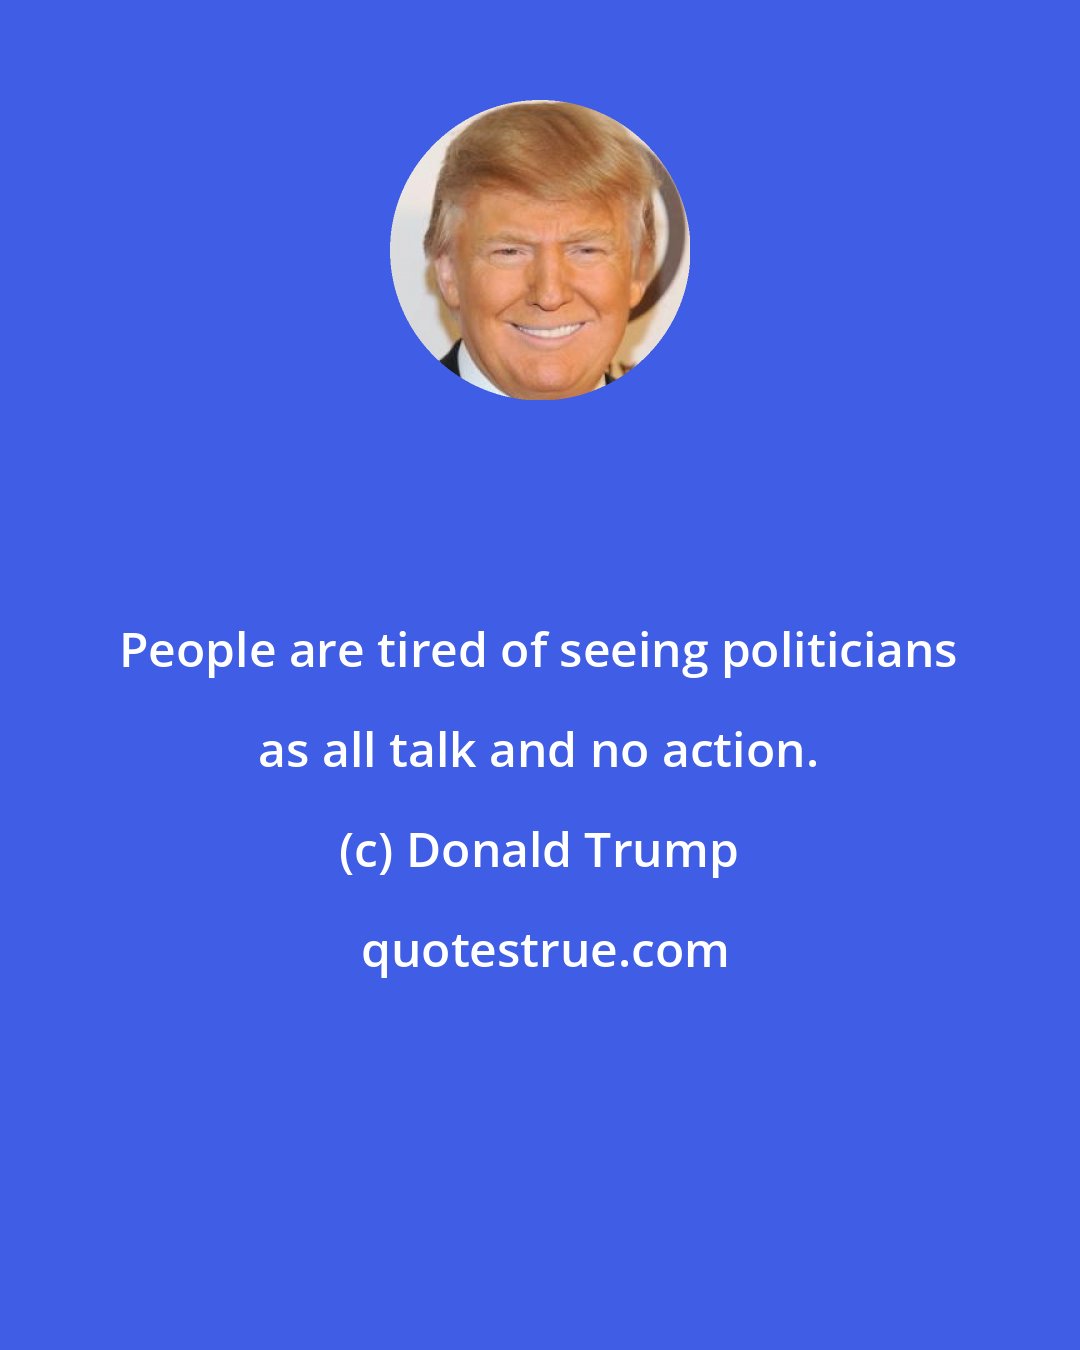 Donald Trump: People are tired of seeing politicians as all talk and no action.